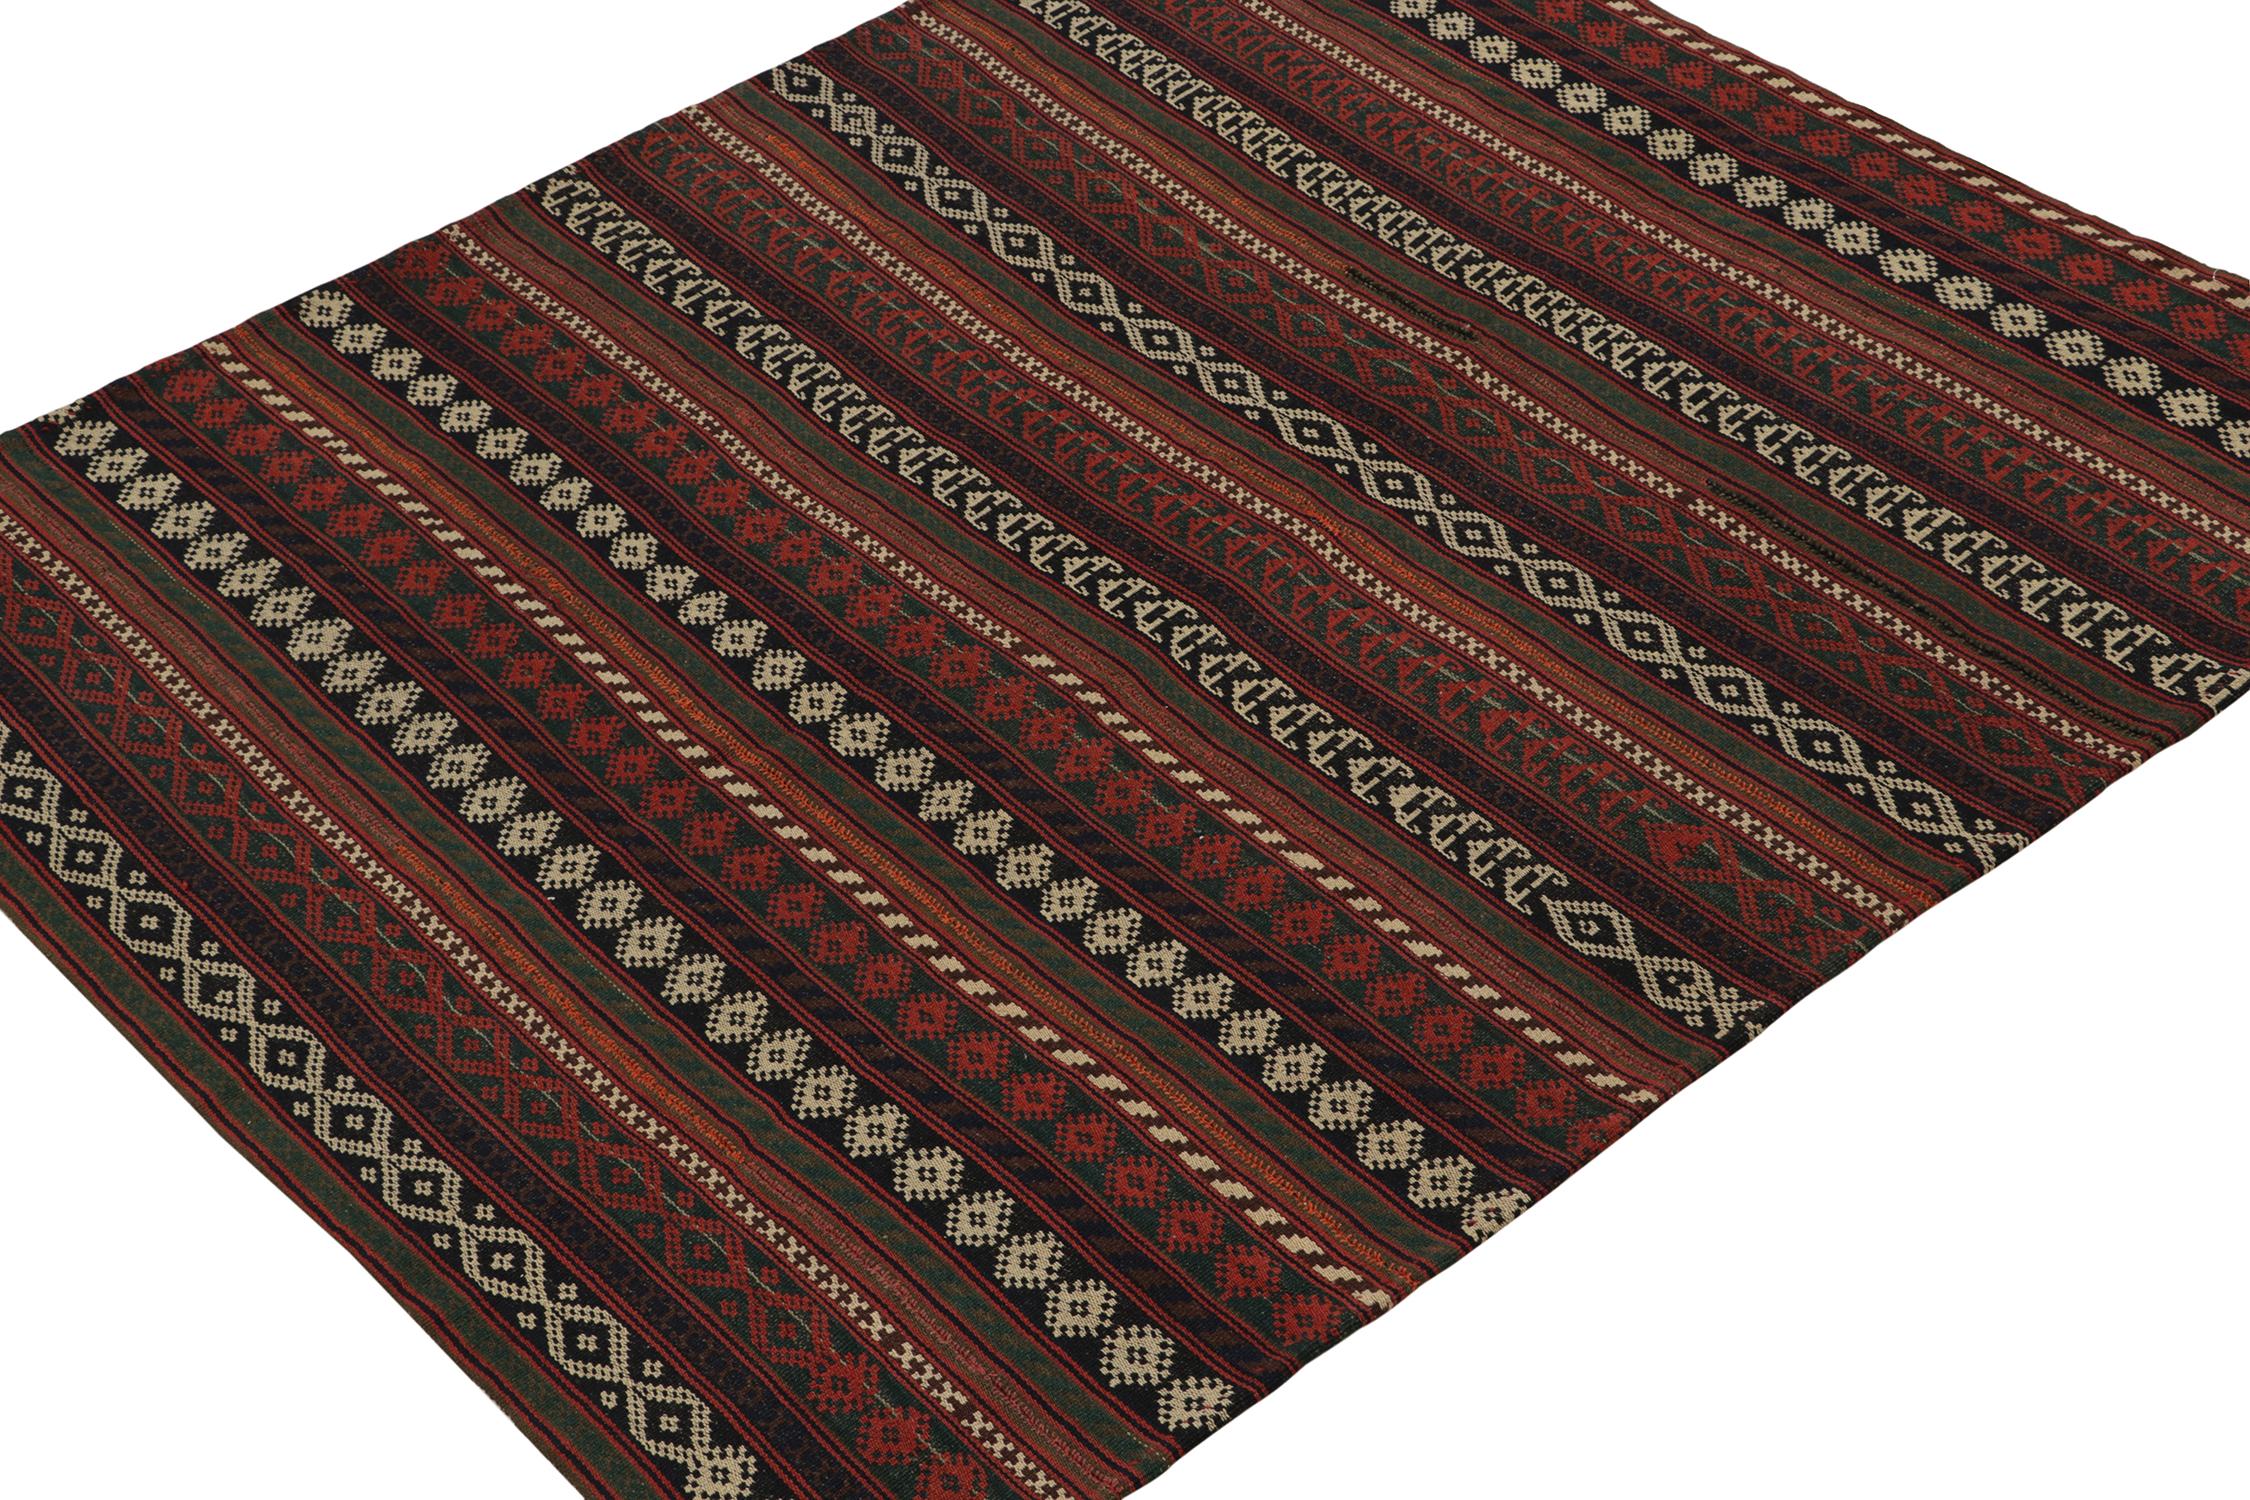 This vintage 6x7 Persian Kilim is a tribal rug of Jajim provenance. Handwoven in wool, it originates circa 1950-1960. 

Further On the Design: 

This Jajim Kilim design exemplifies the panel-weaving style its provenance favors, and plays stripes